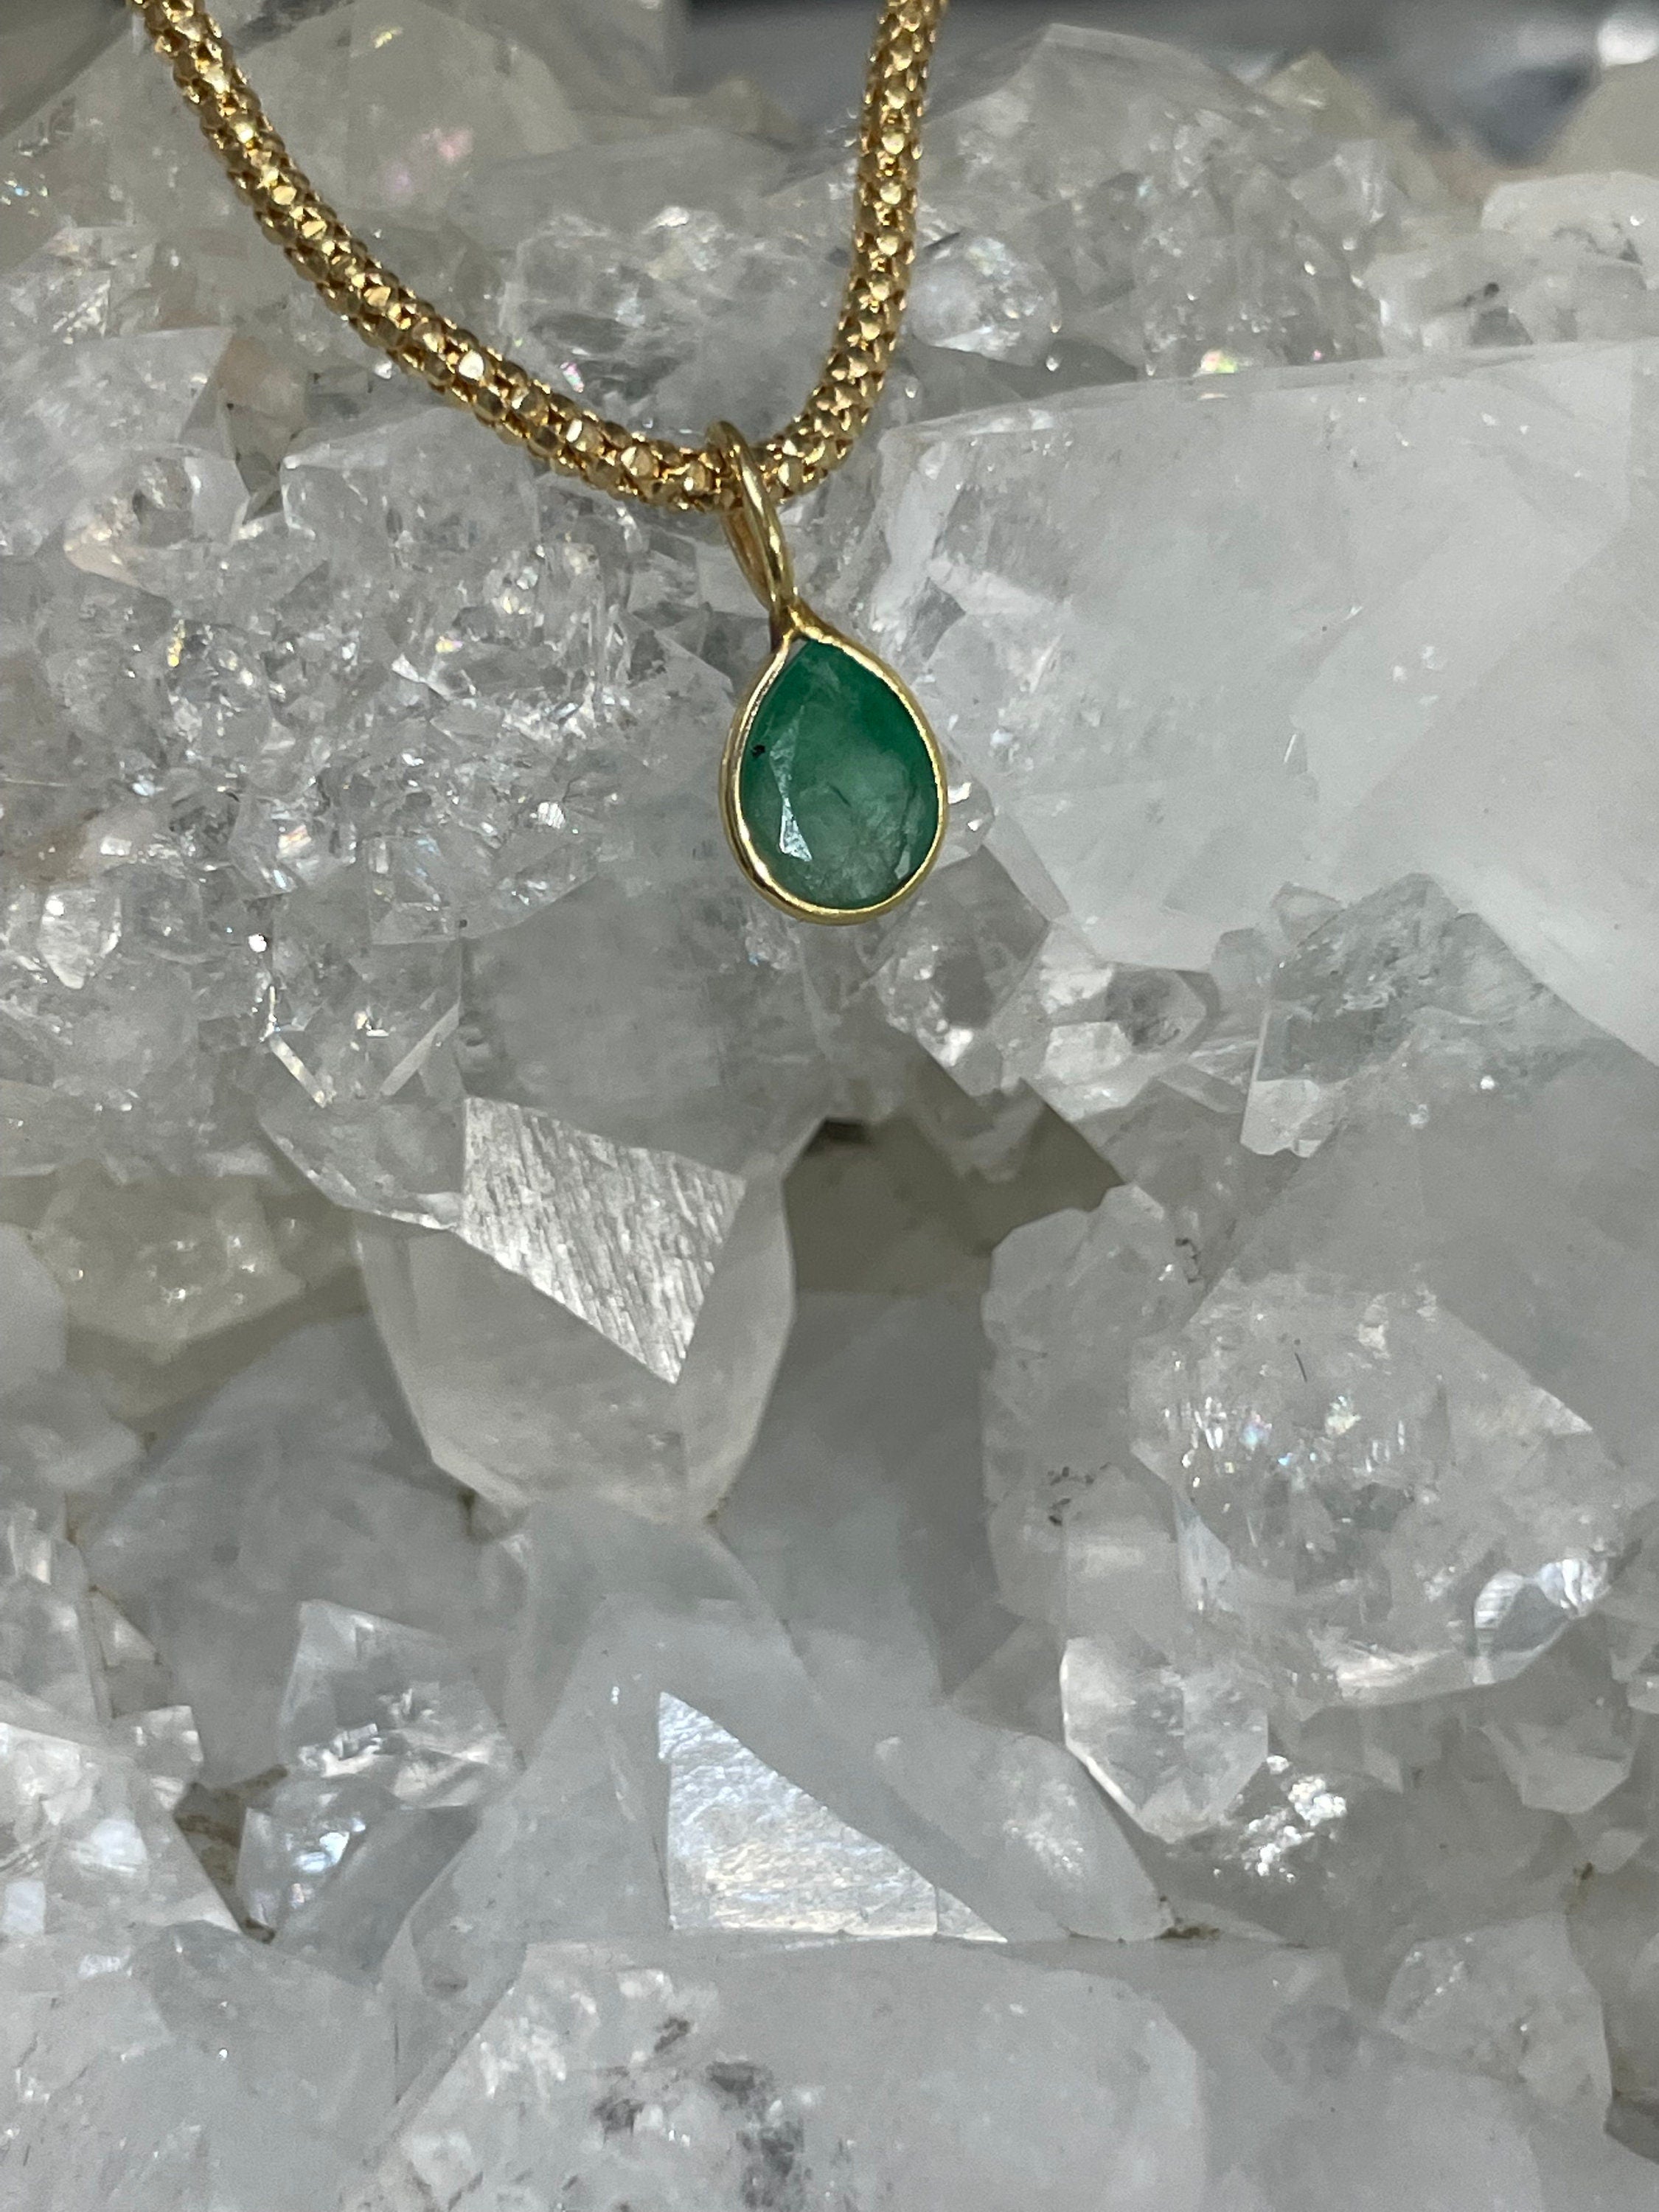 Shimmering! .65CT Natural Colombian Emerald 14K Yellow Gold Bezeled Charm Pendant OOAK 12x5mm